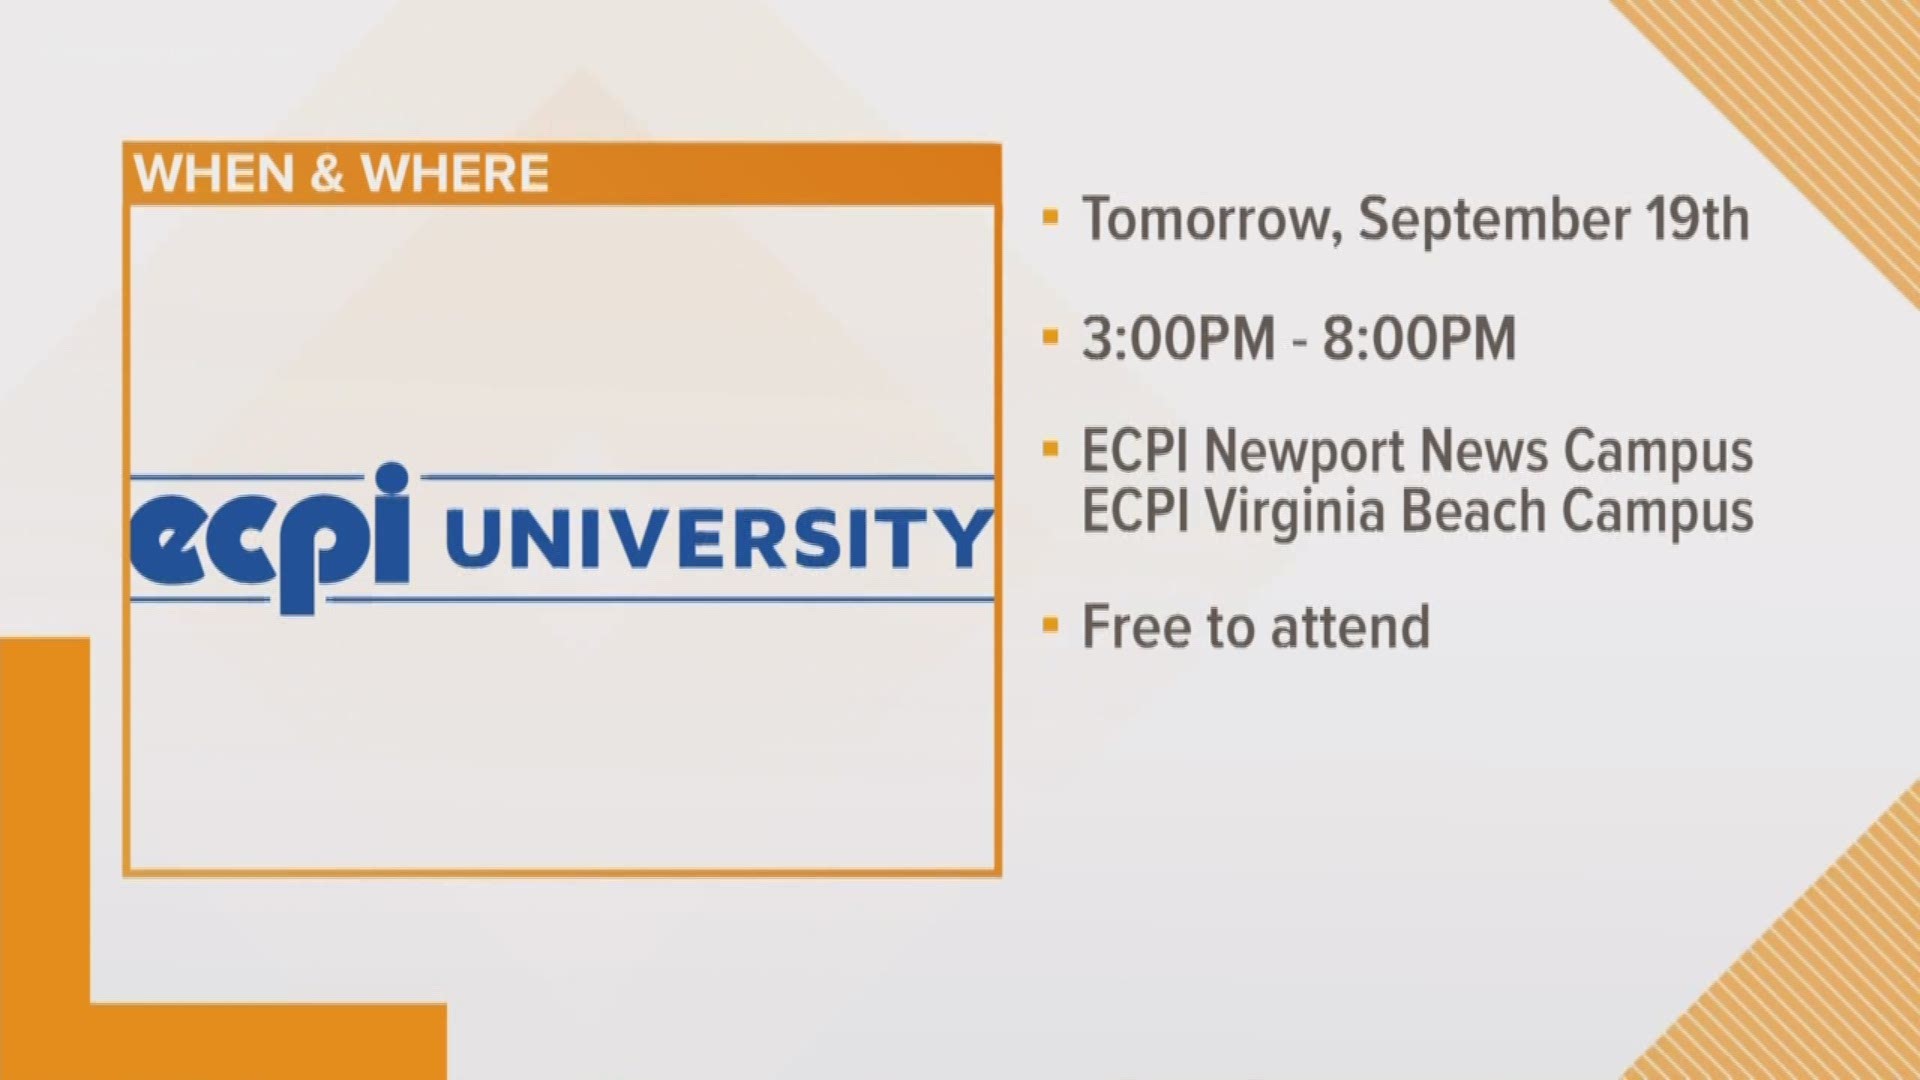 ECPI is hosting multiple Military & Veterans Community Day events at its Newport News and Virginia Beach campuses. The events are free and open to active military personnel, veterans, family members and current students. Military members and families can ask questions about education and courses at the school.